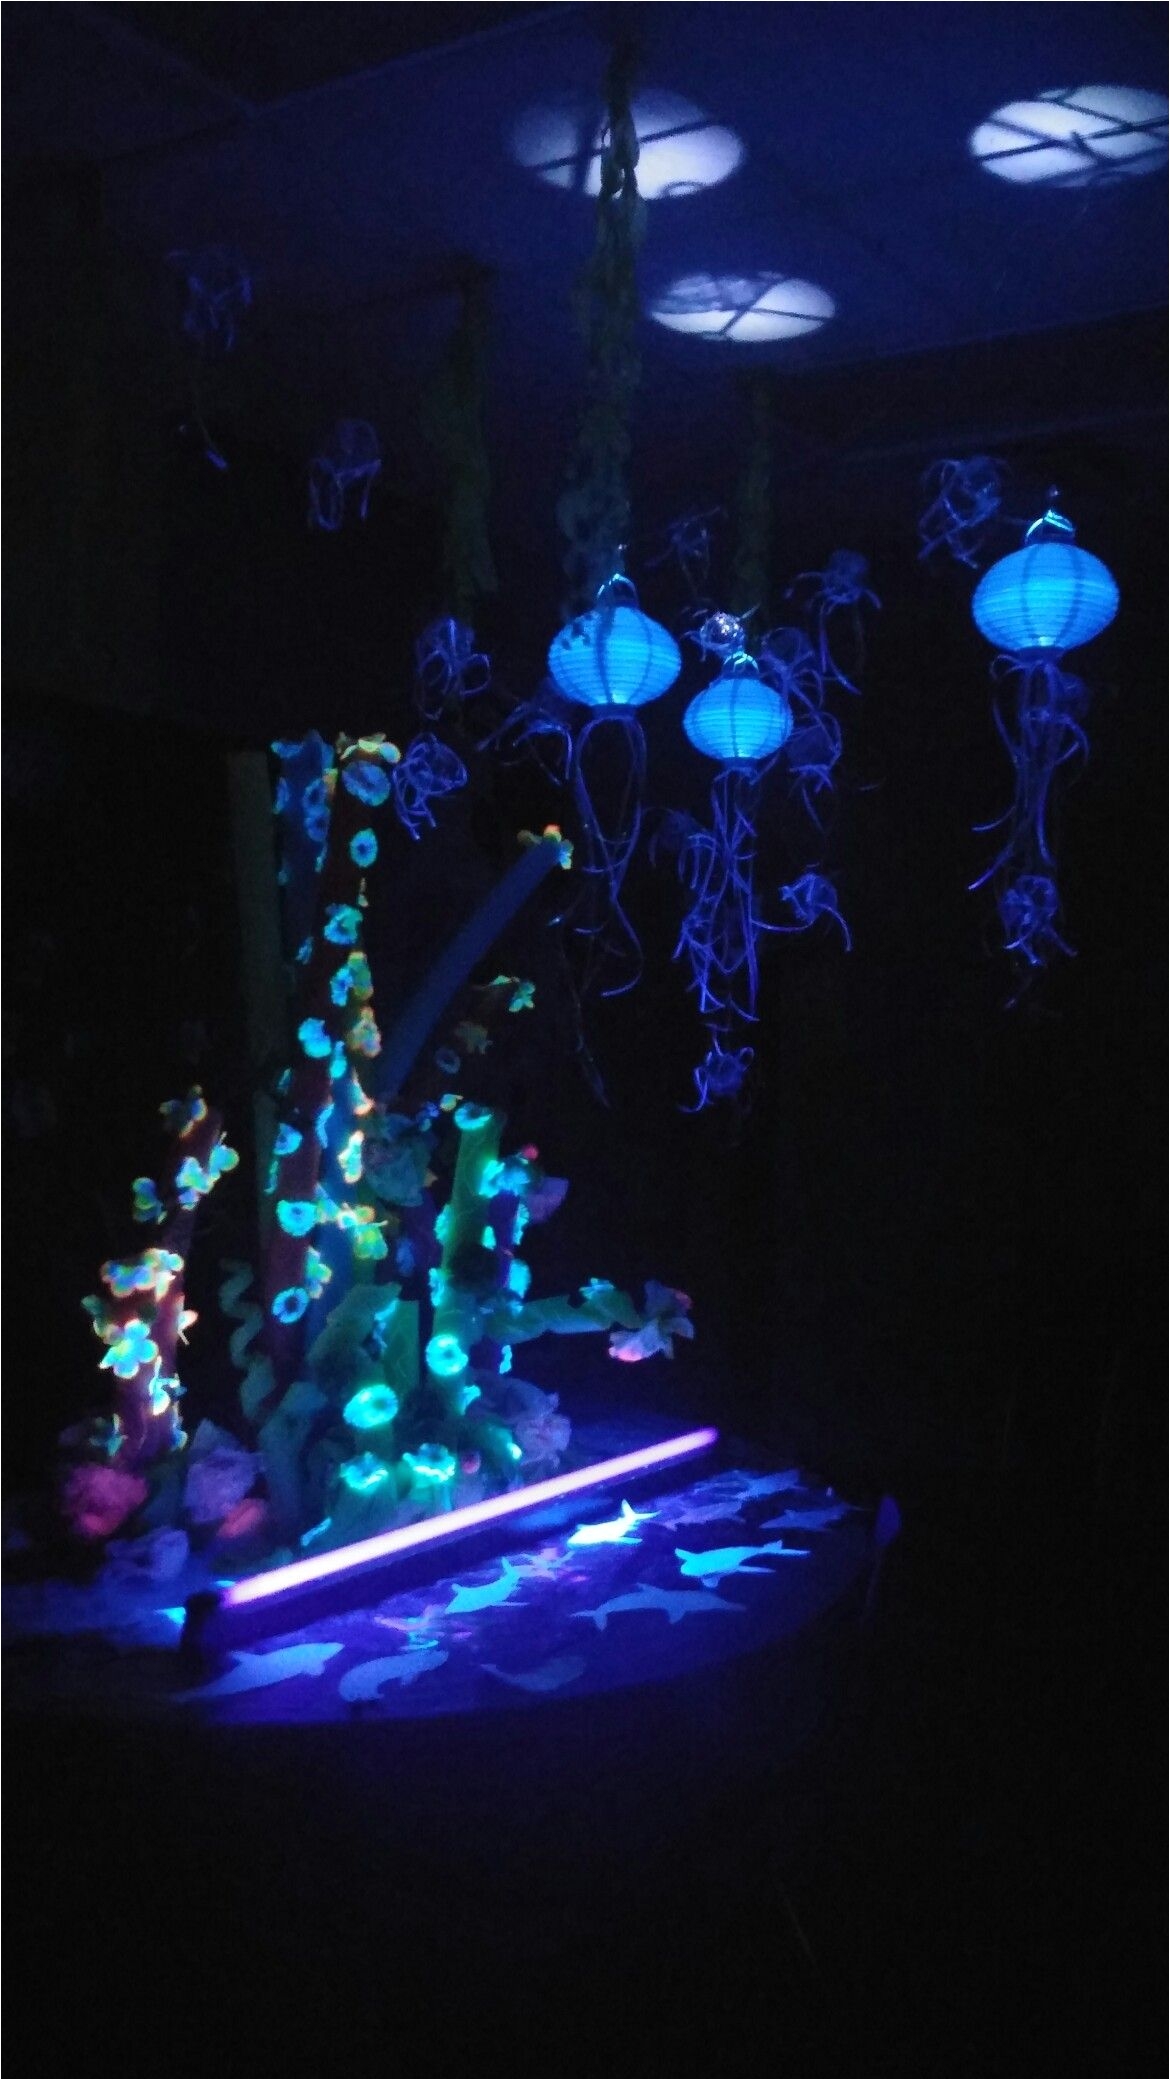 pool noodle and neon flower for coral reef glows with black light under the